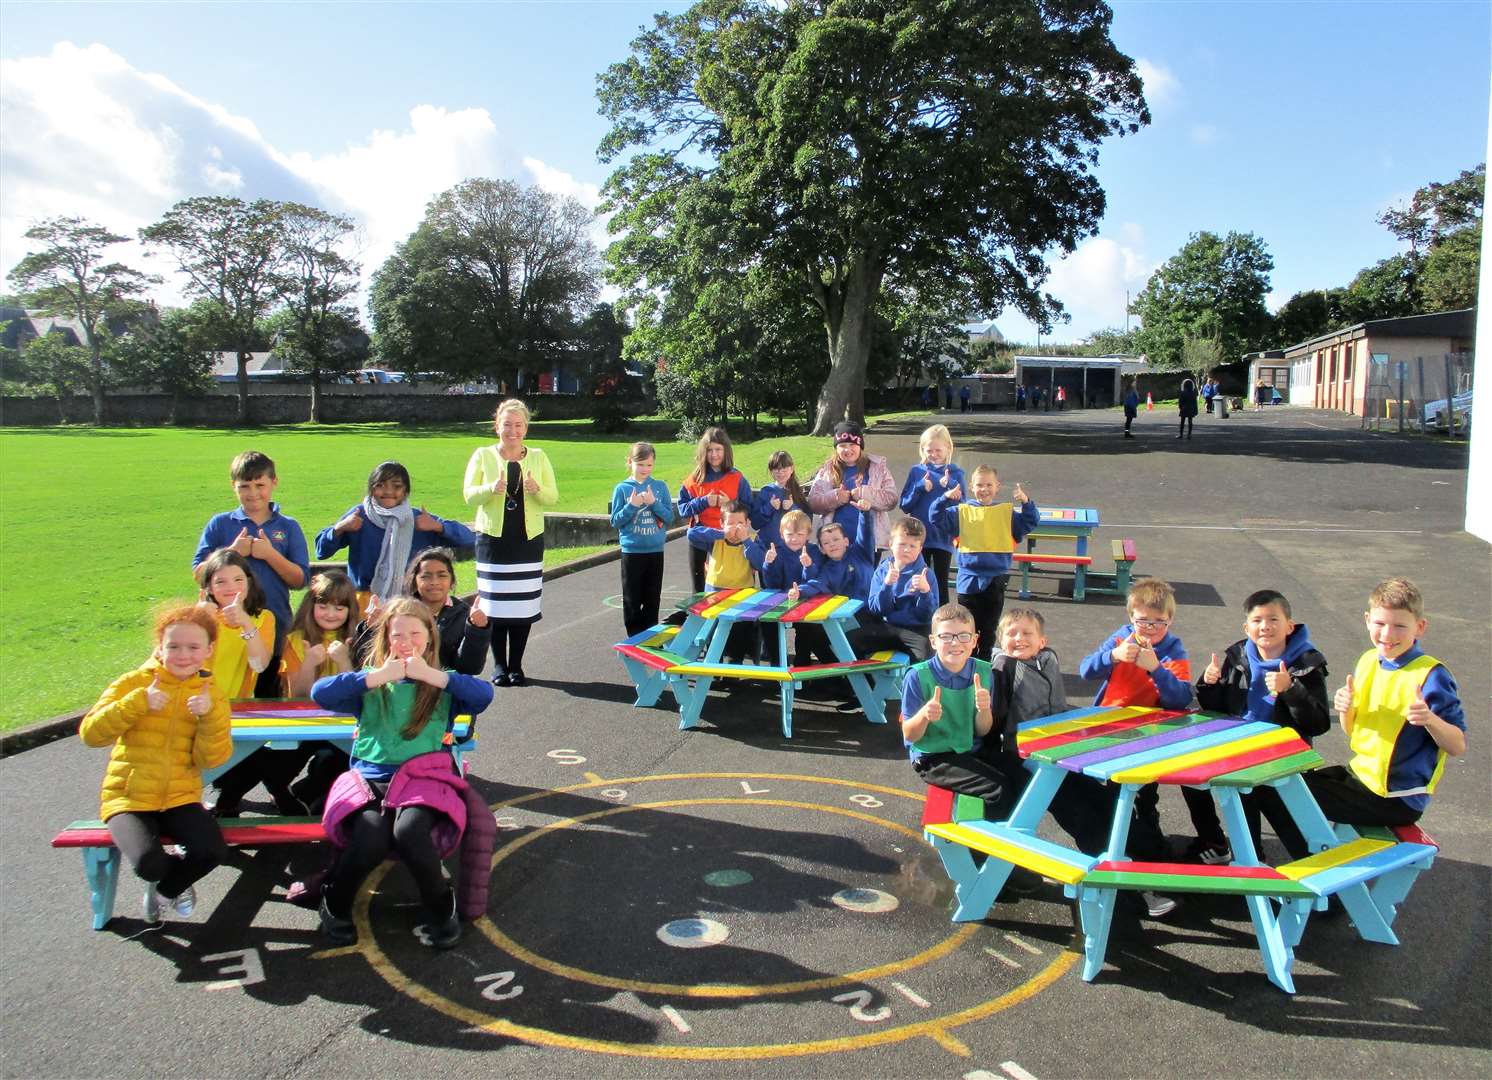 Receiving the benches is Miller Academy head teacher Jacqui Budge with pupils from P1, P2 and P3.